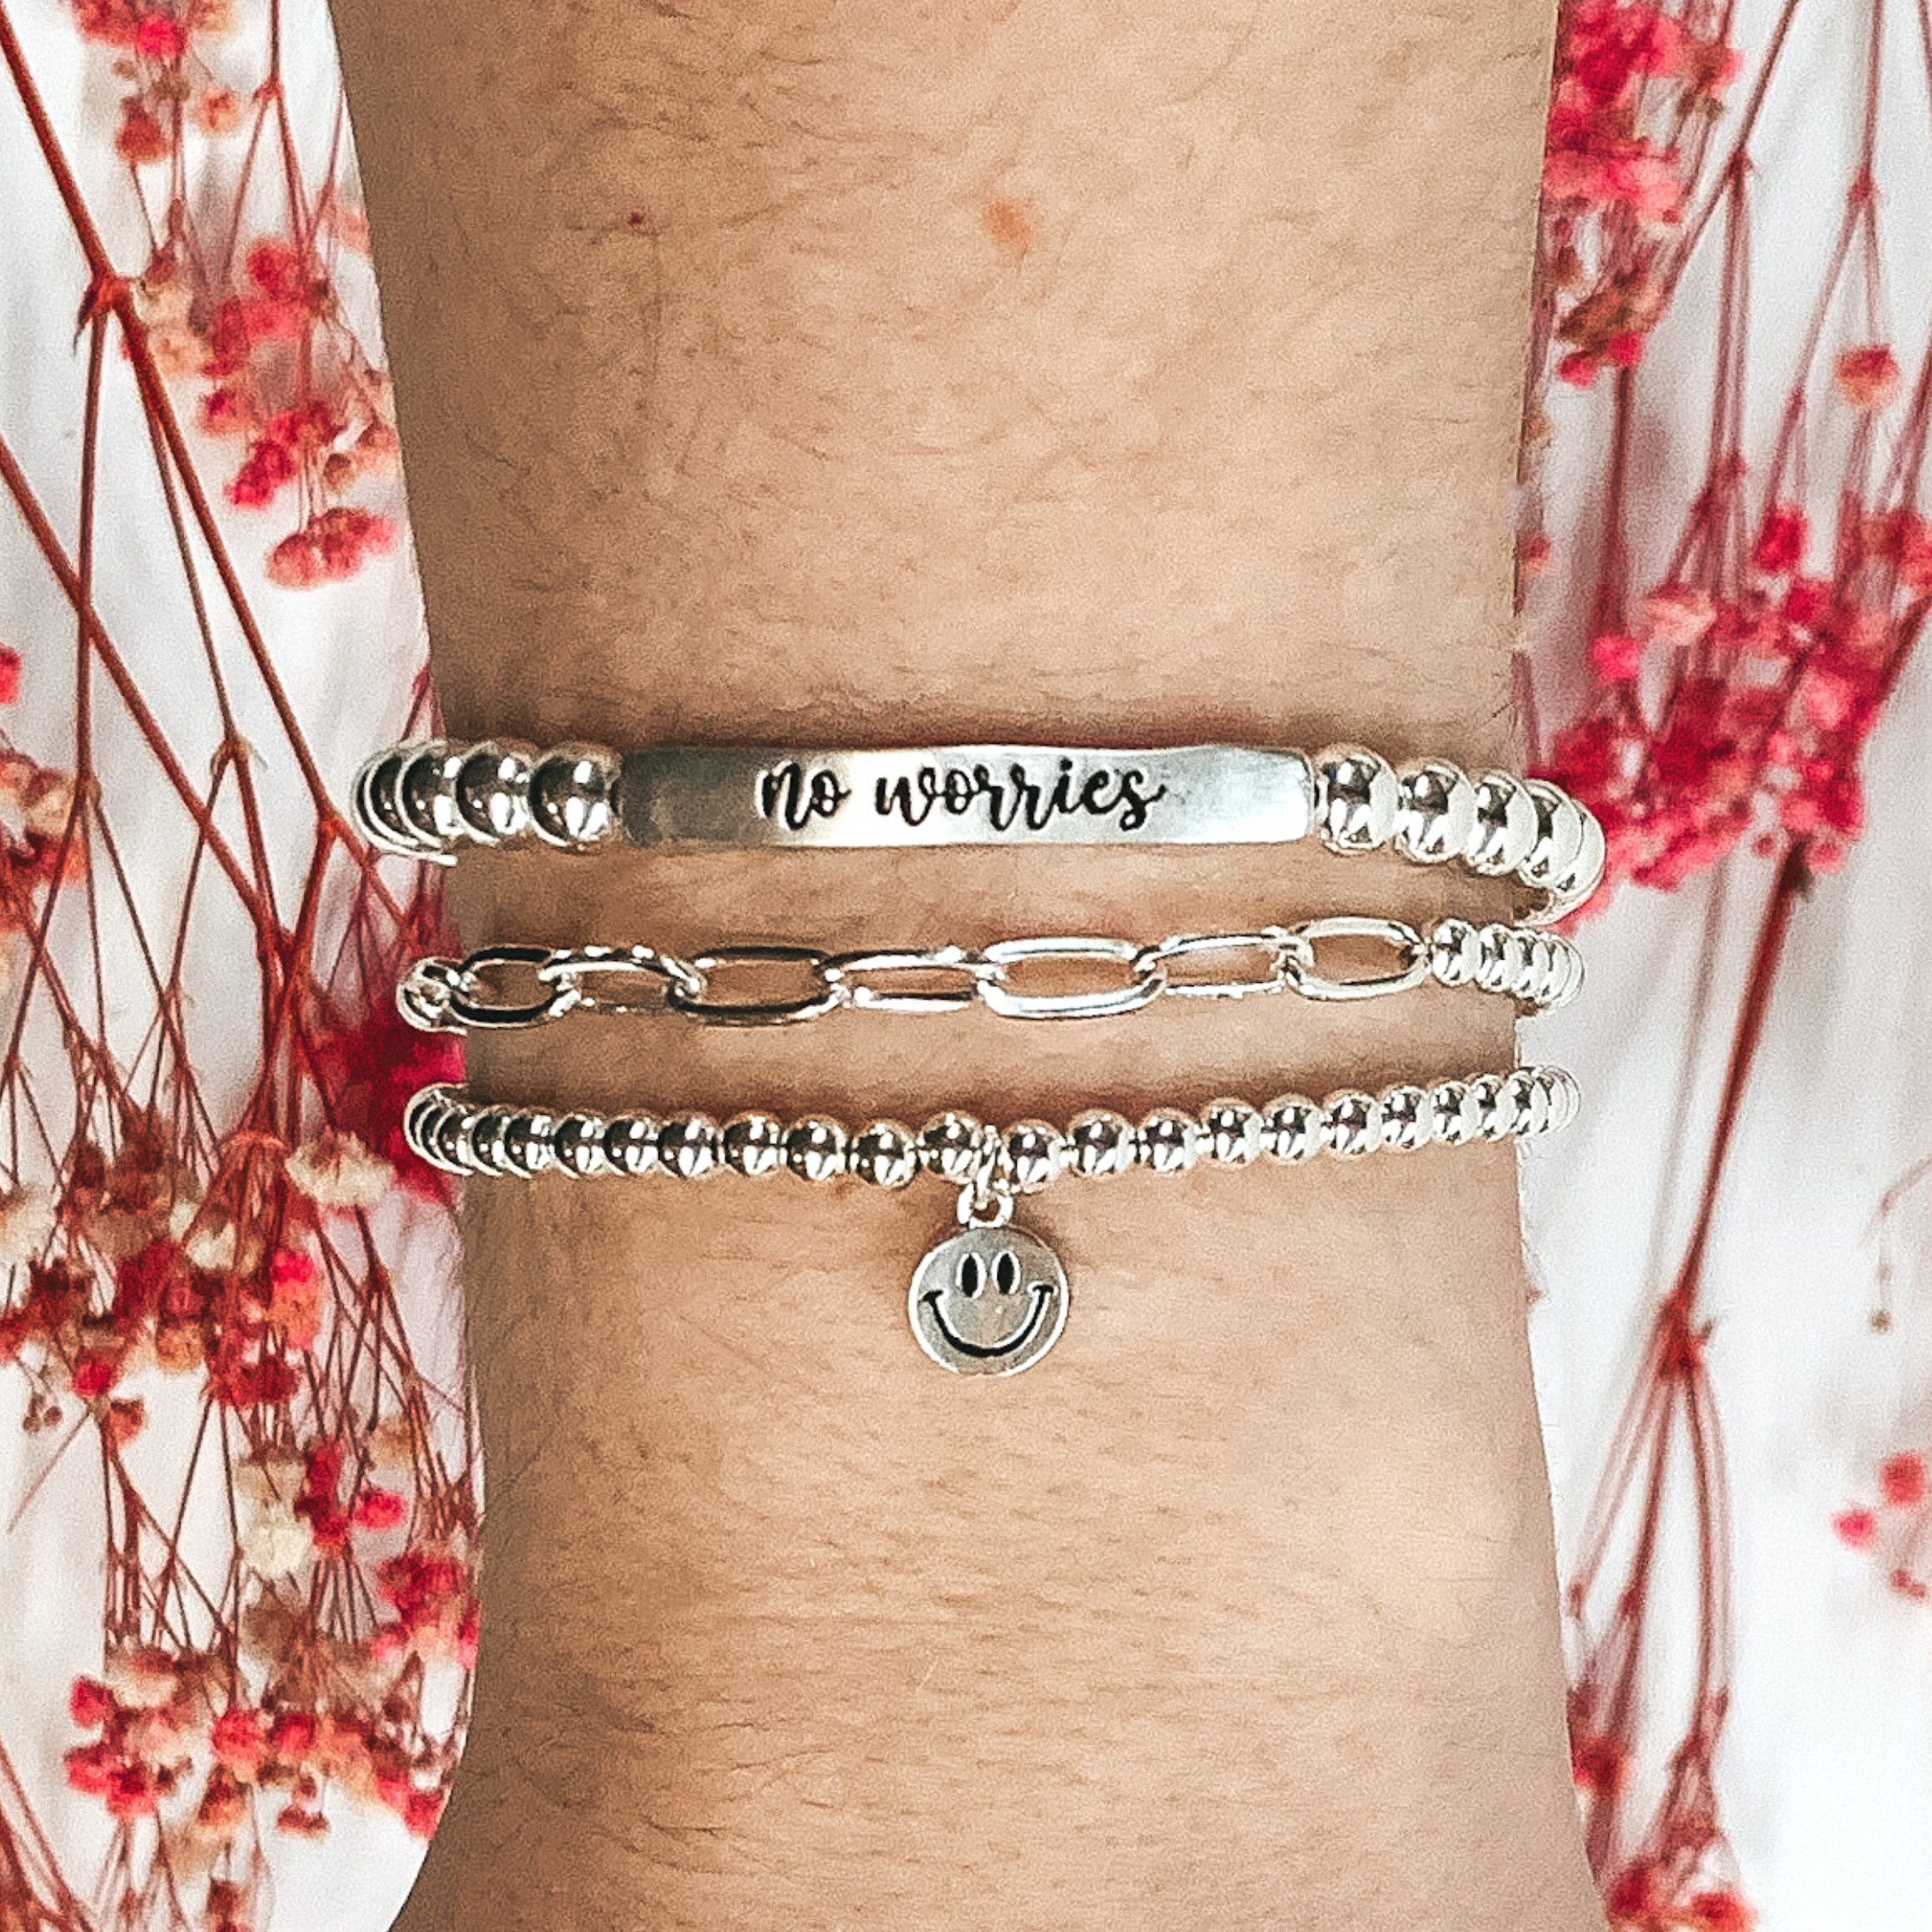 No Worries Beaded Bracelet Set in Silver - Giddy Up Glamour Boutique